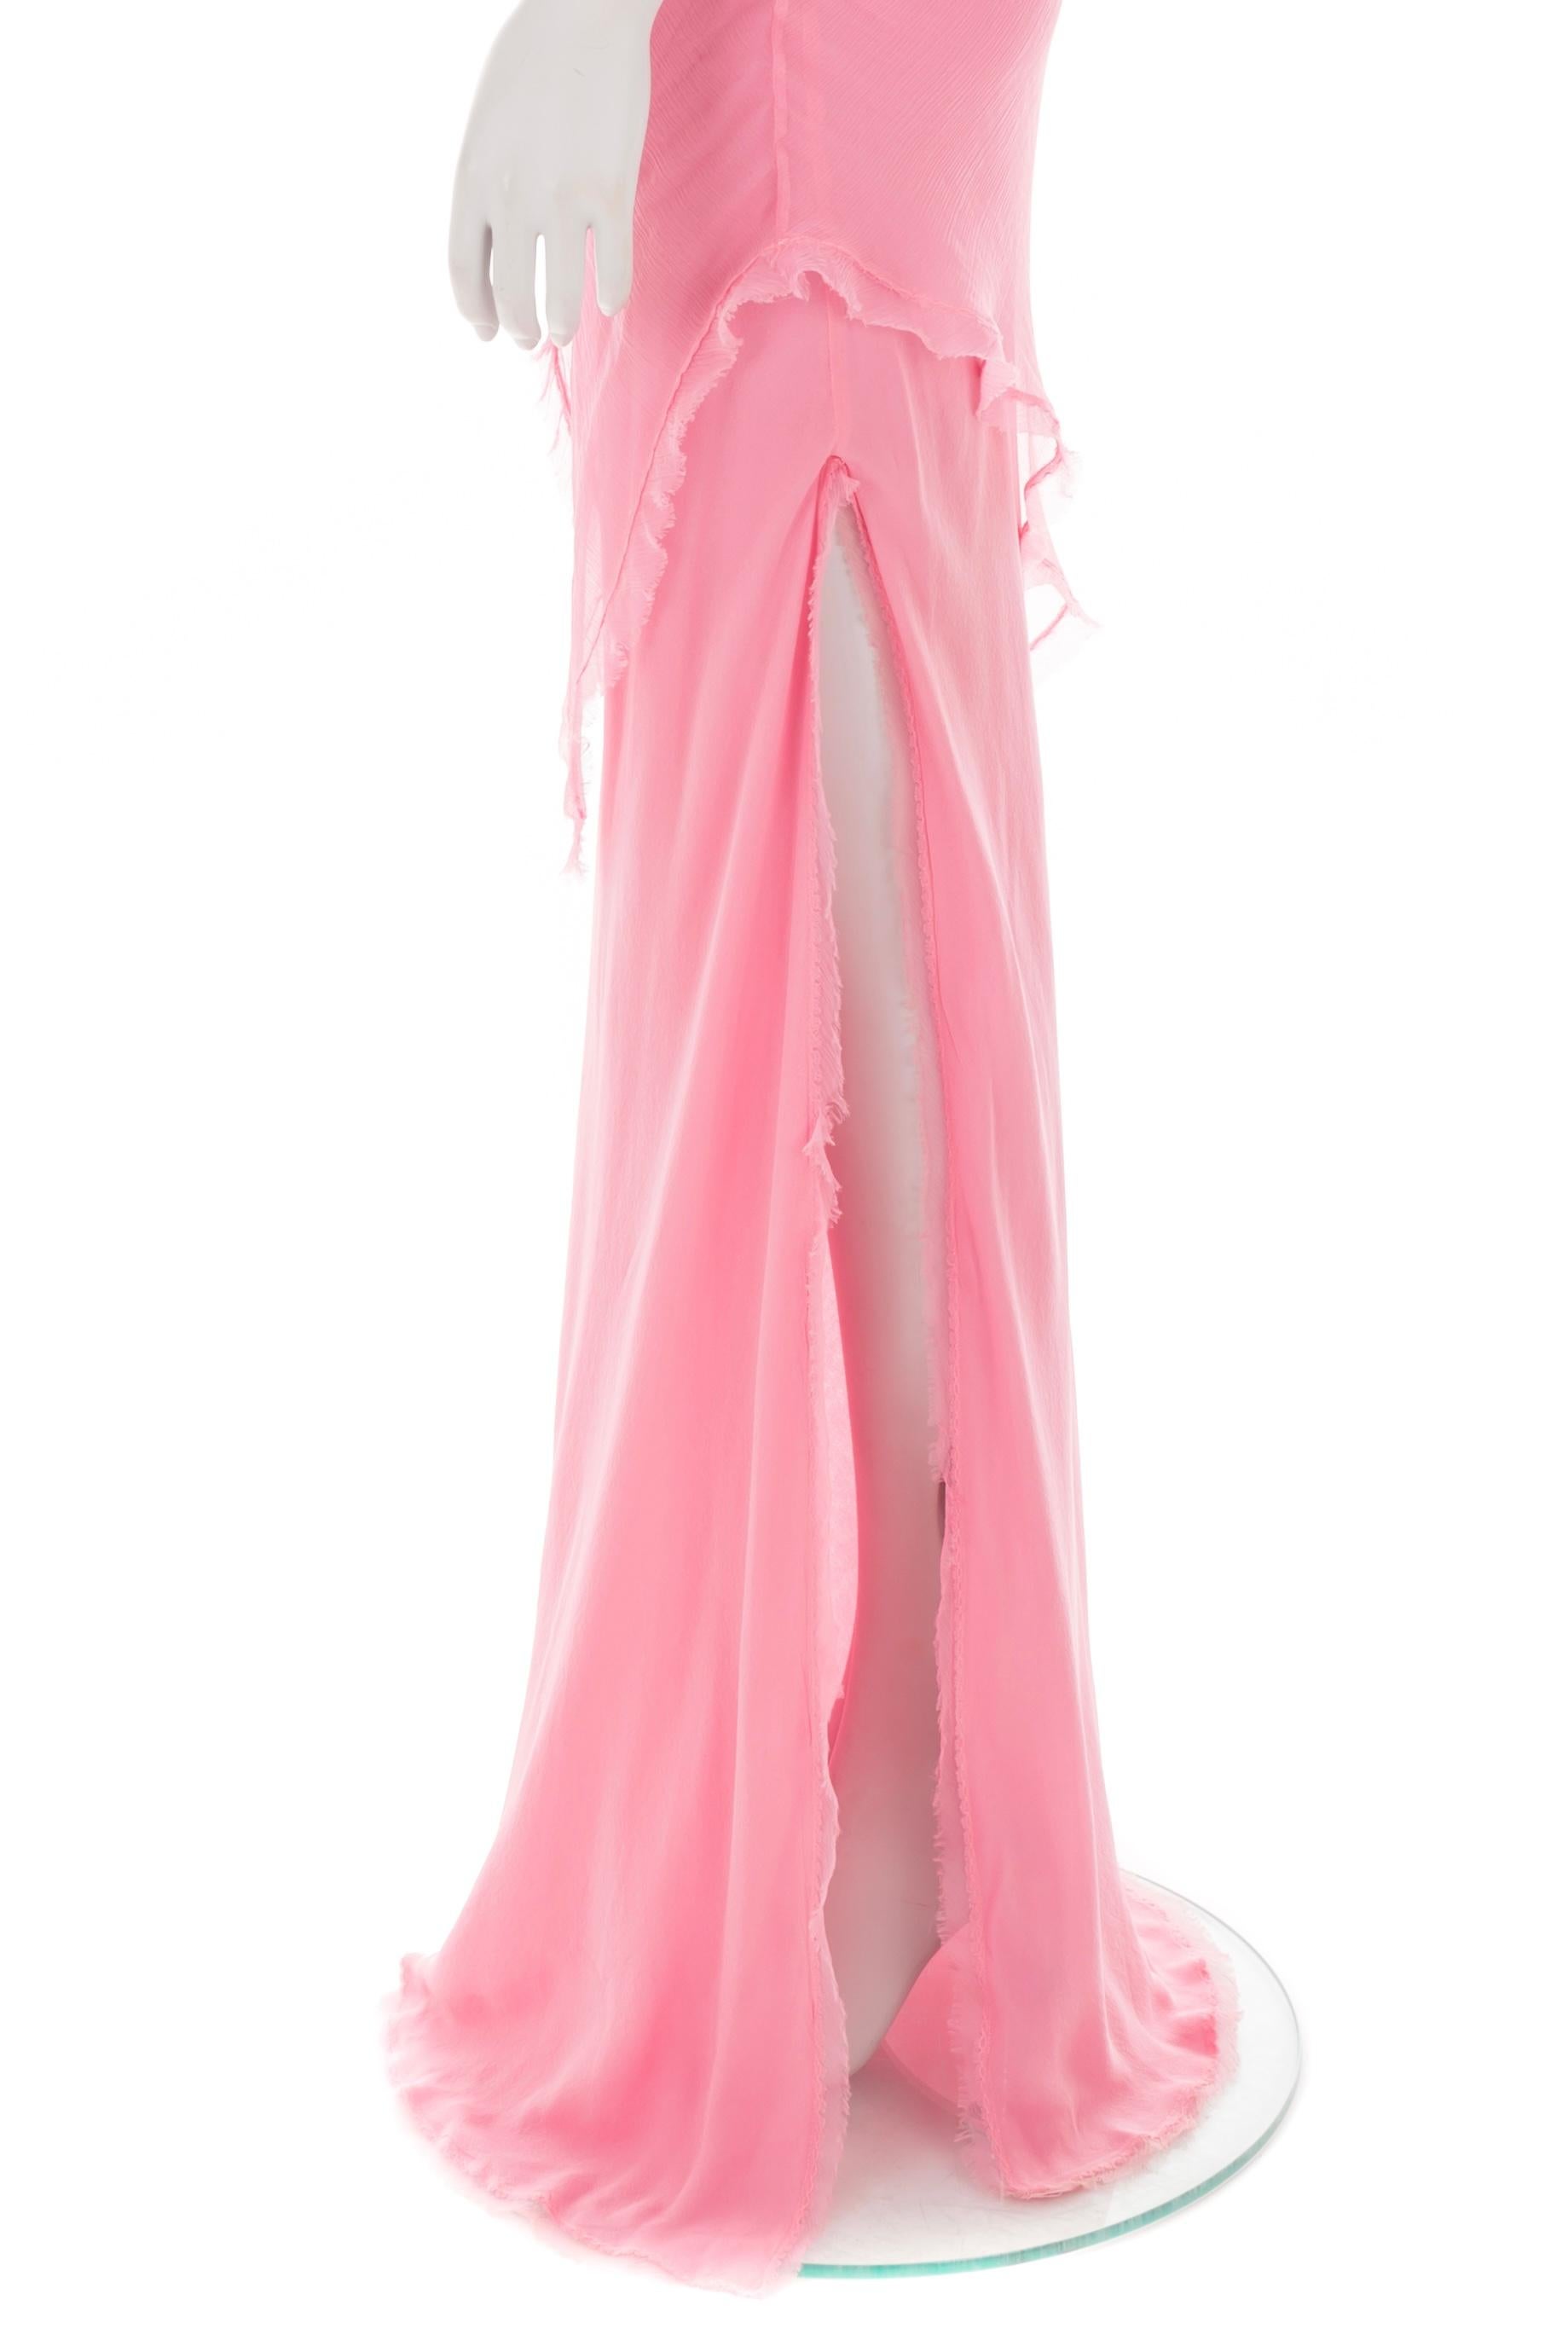 Ermanno Scervino S/S 2004 multi-layered pink chiffon gown with side slit For Sale 1